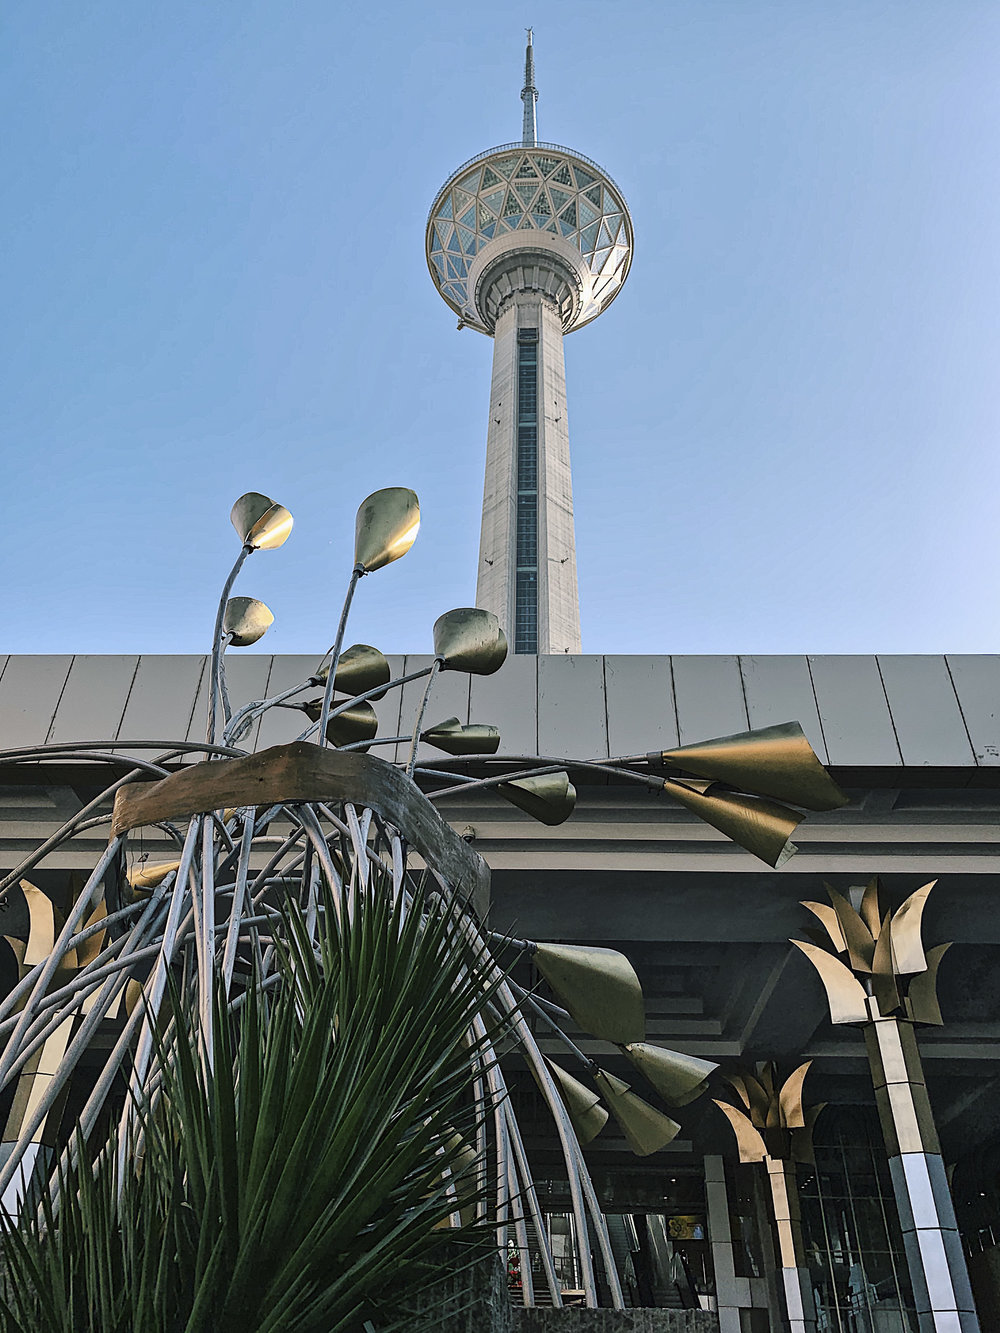 Milad Tower is the 6th tallest radio tower in the world